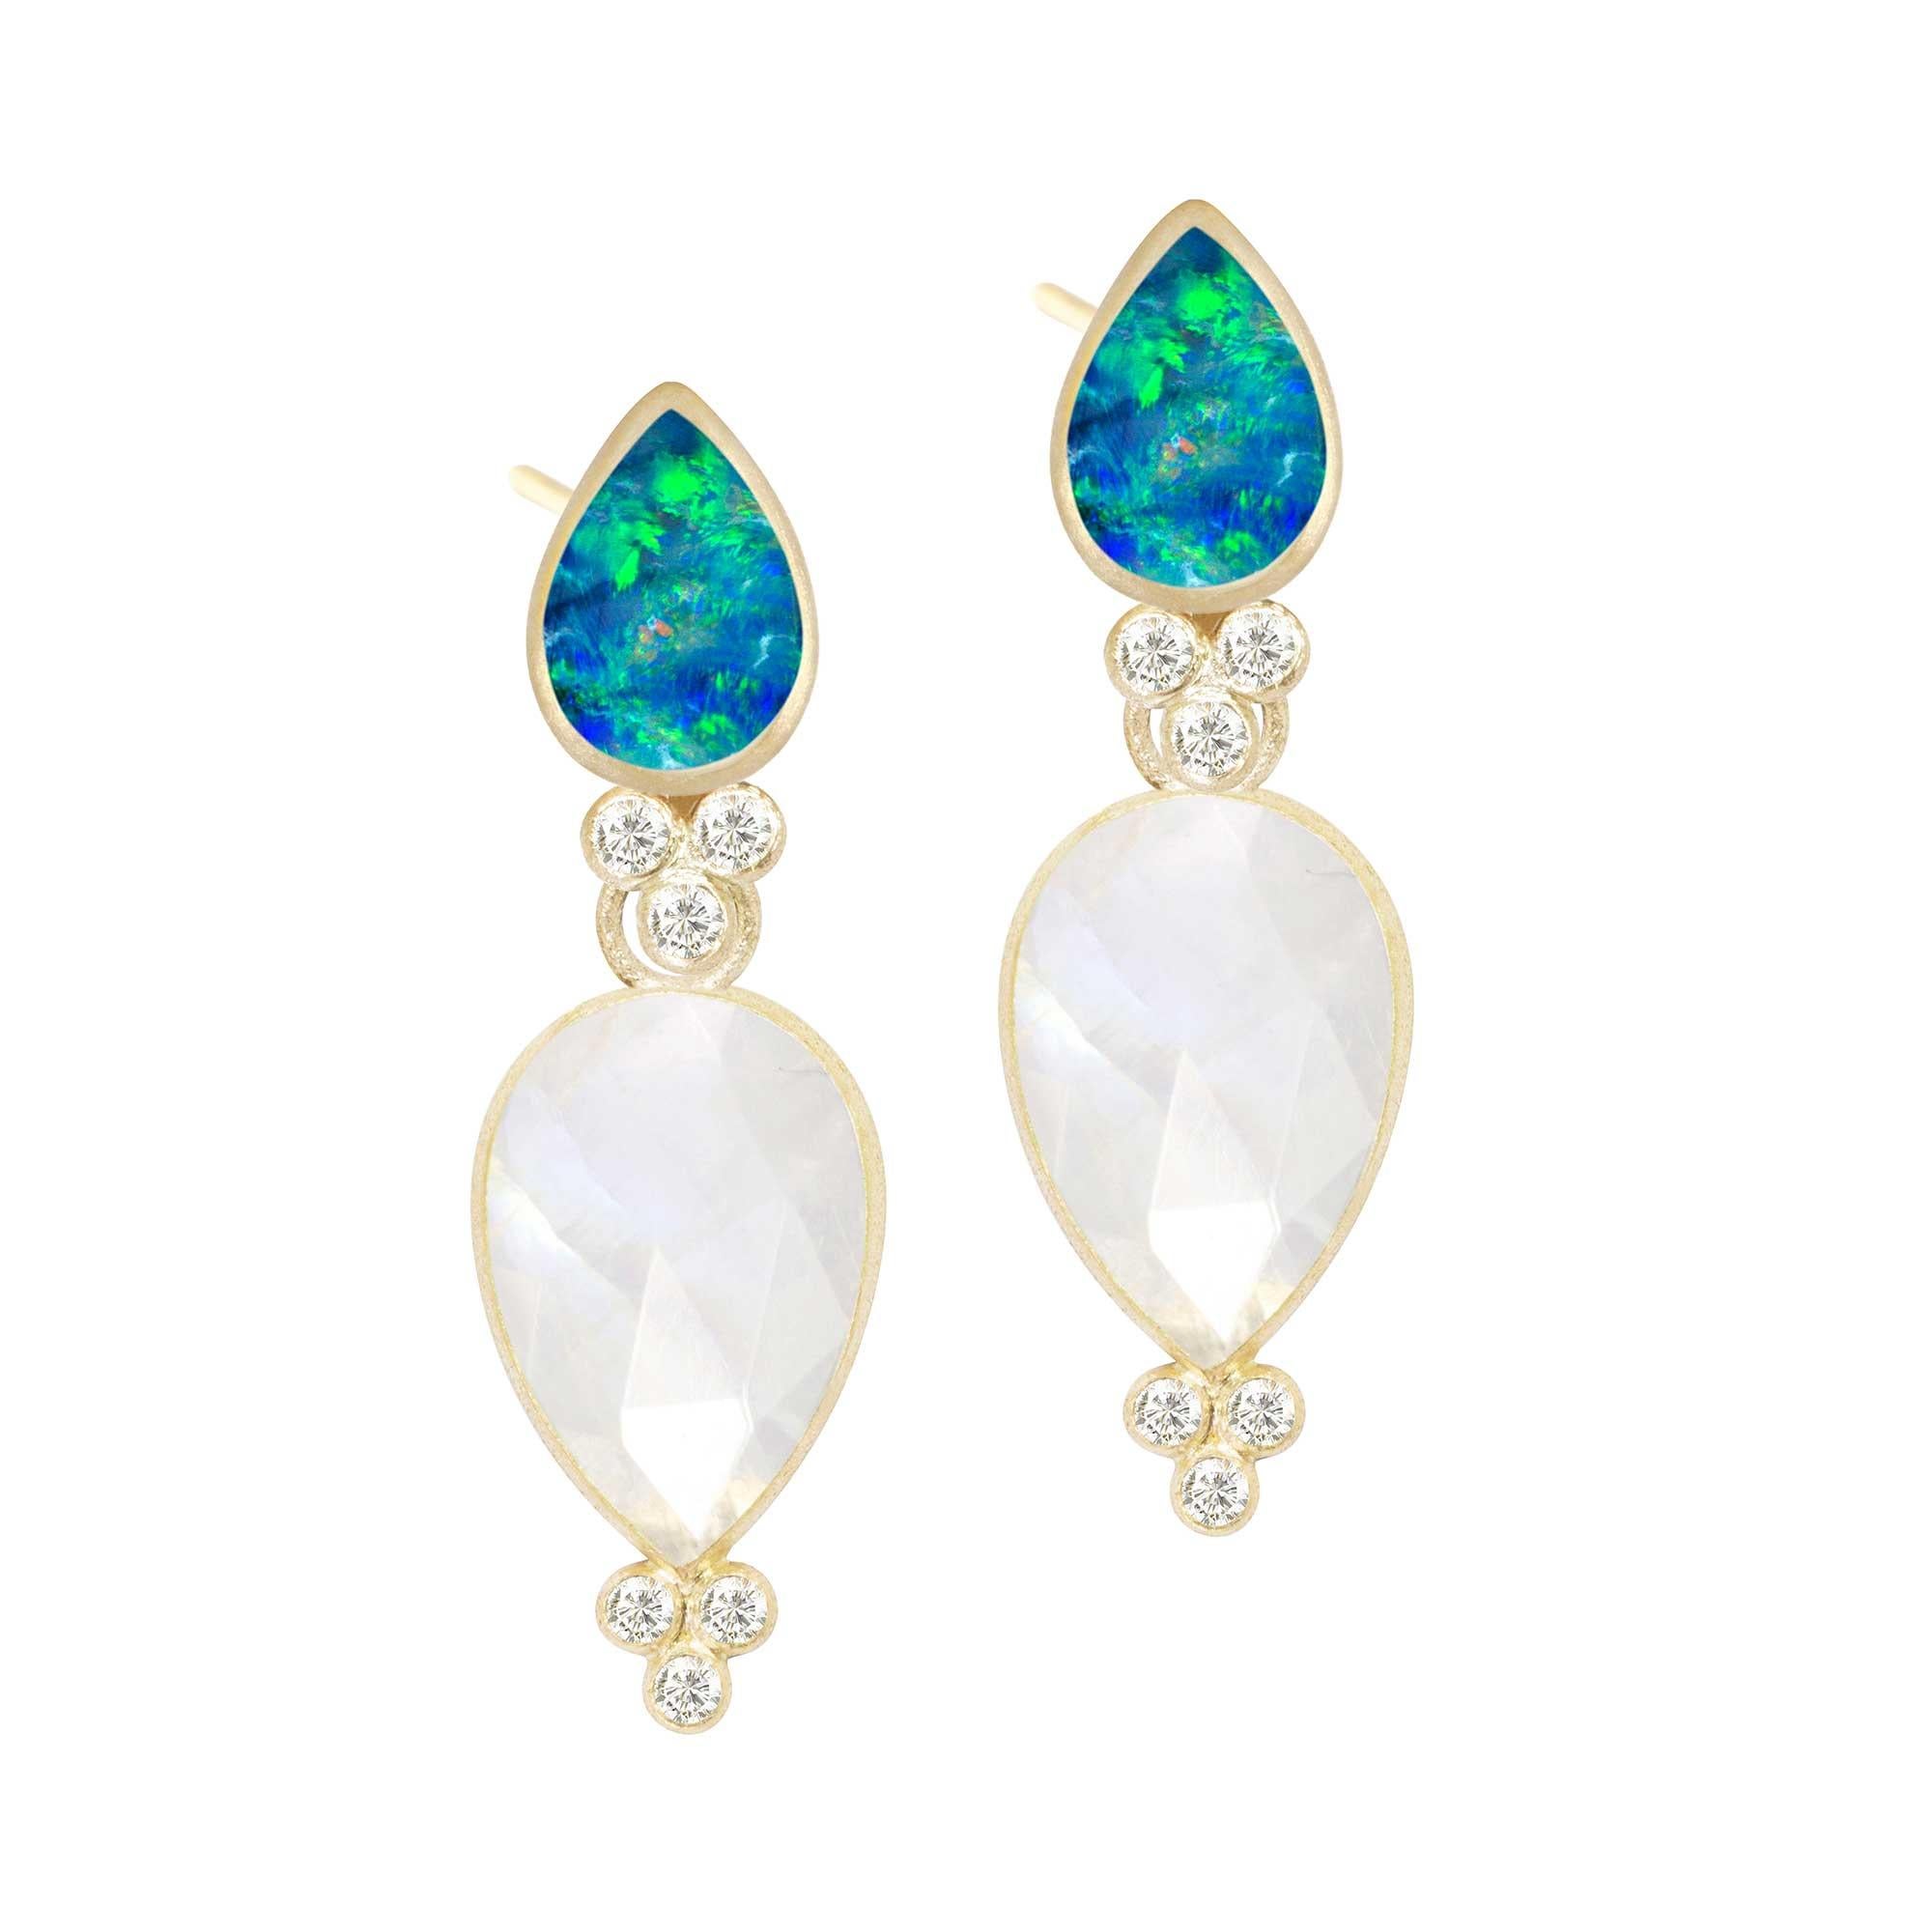 Made with bezel-set opal, the diamond-accented Lilly Gold Studs are clean and elegant, and a very feminine style you can wear day in, day out.
With rich, regal moonstone in a petal-like pear shape, the diamond-accented Mia Small Gold Charms bloom